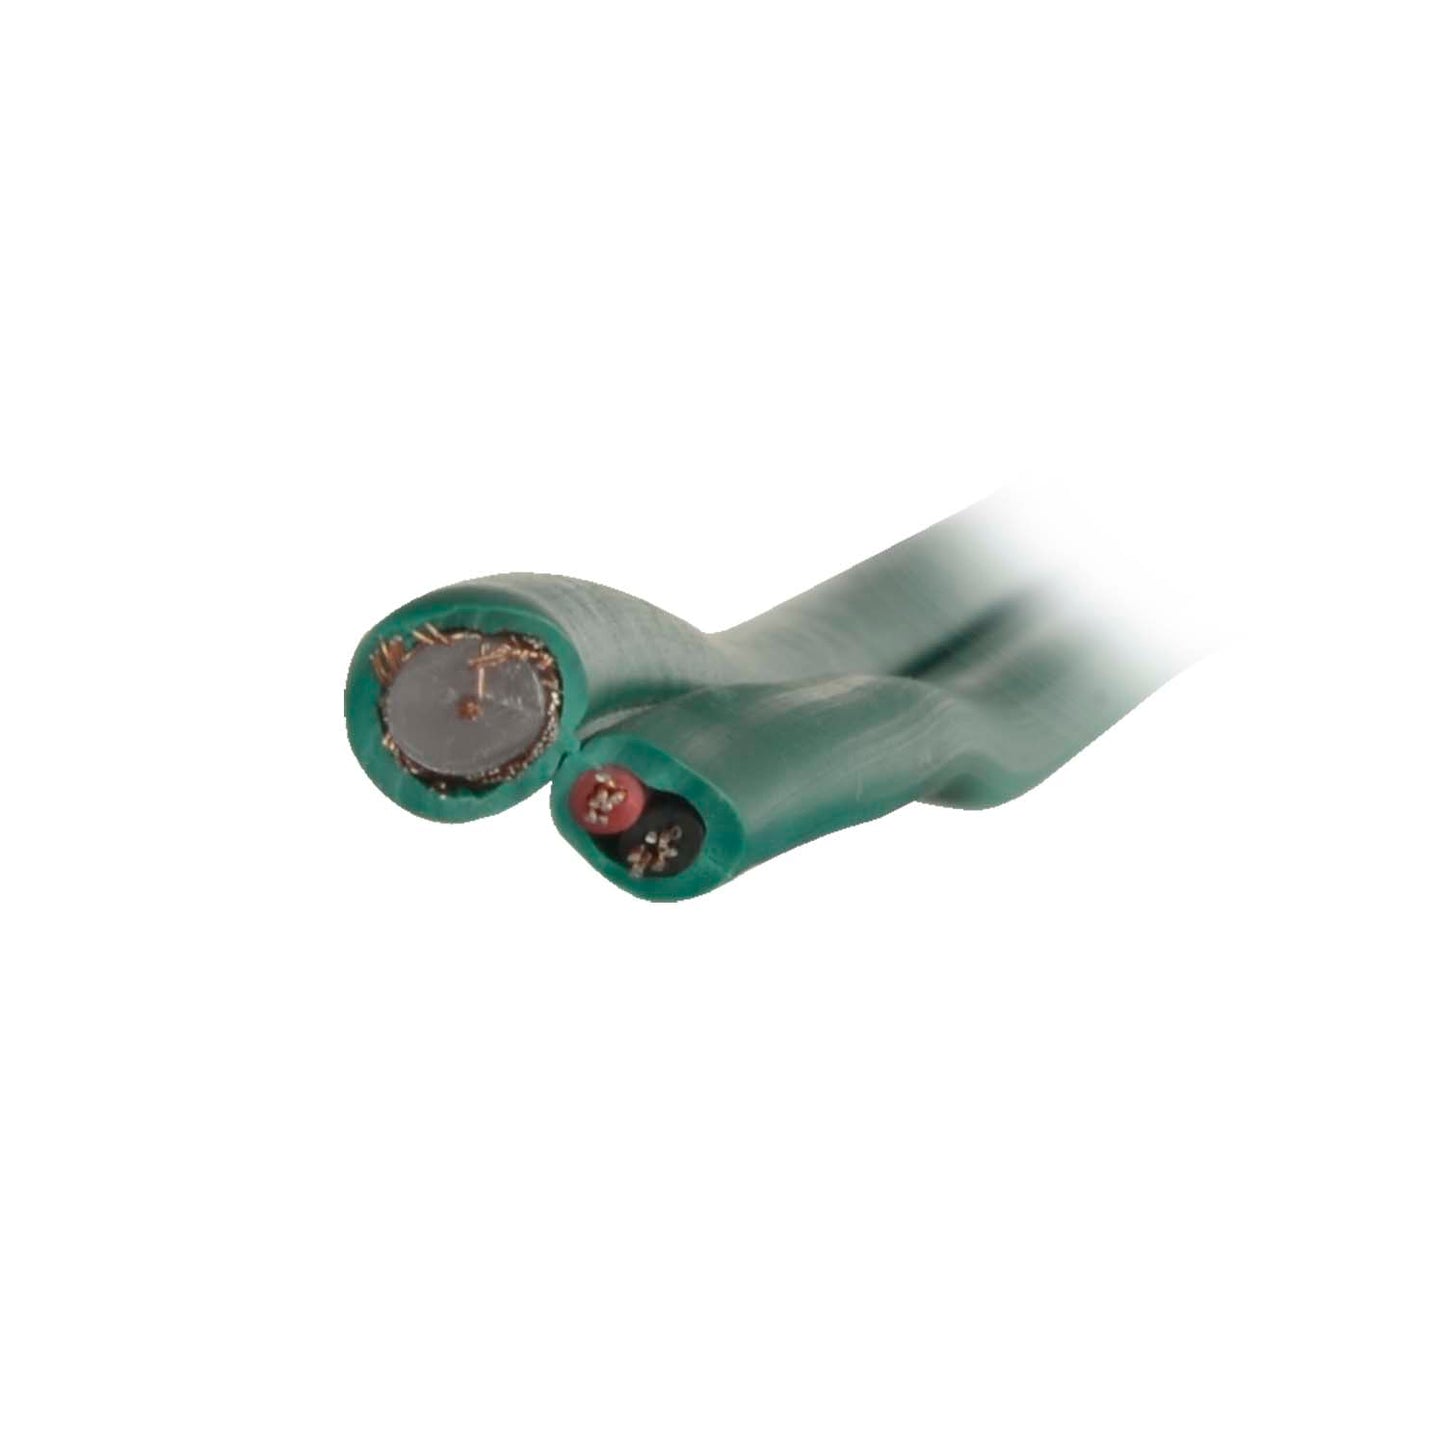 KX6 coaxial cable - Video and power - 100 meter reel - Green blanket - separate parallel cables - Low losses